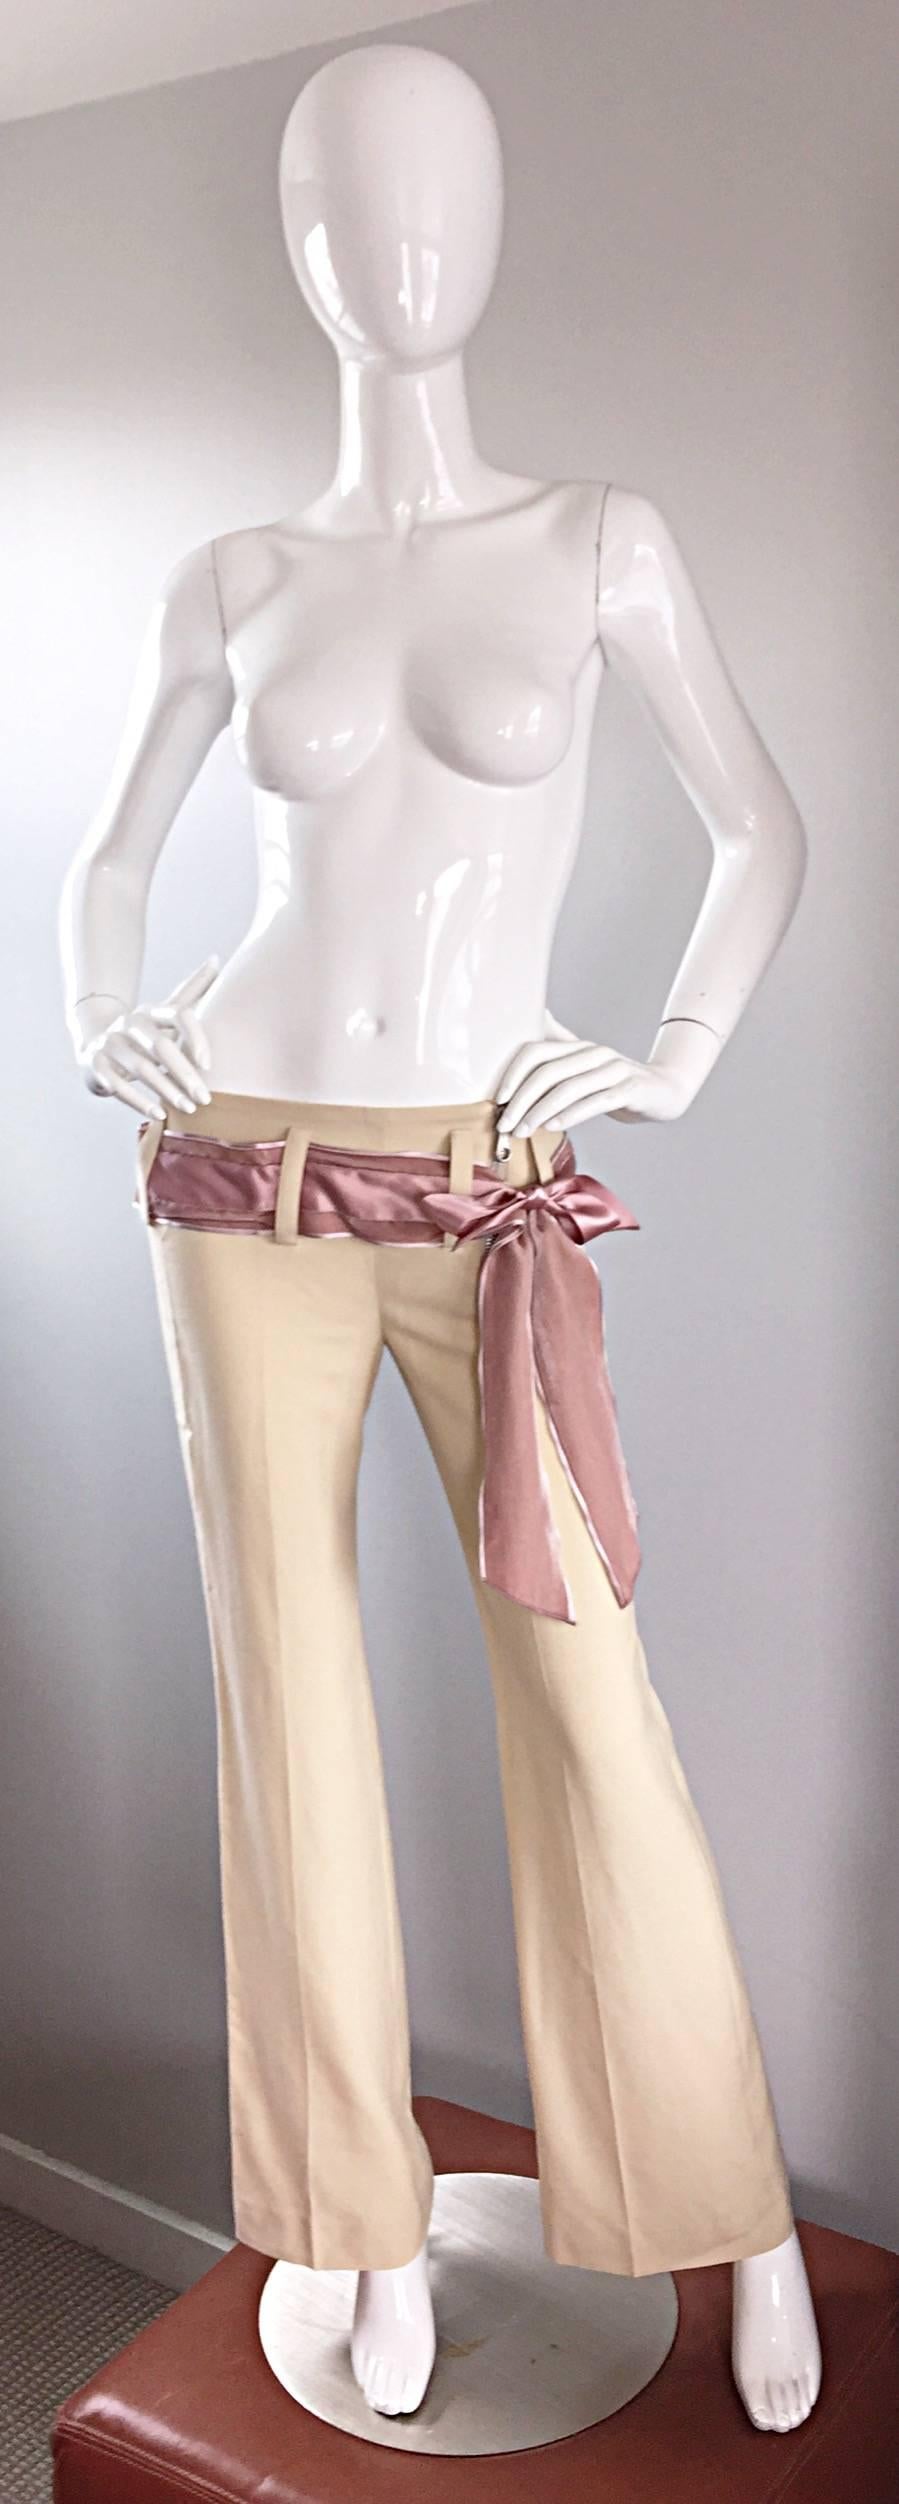 Chic vintage CHLOE, by STELLA MCCARTNEY, khaki wide leg low rise trousers! Never worn! Very lightweight wool is super soft! Features attached pink silk and velvet bow belt, with a stylish exposed silver zipper on front side. Super flattering fit